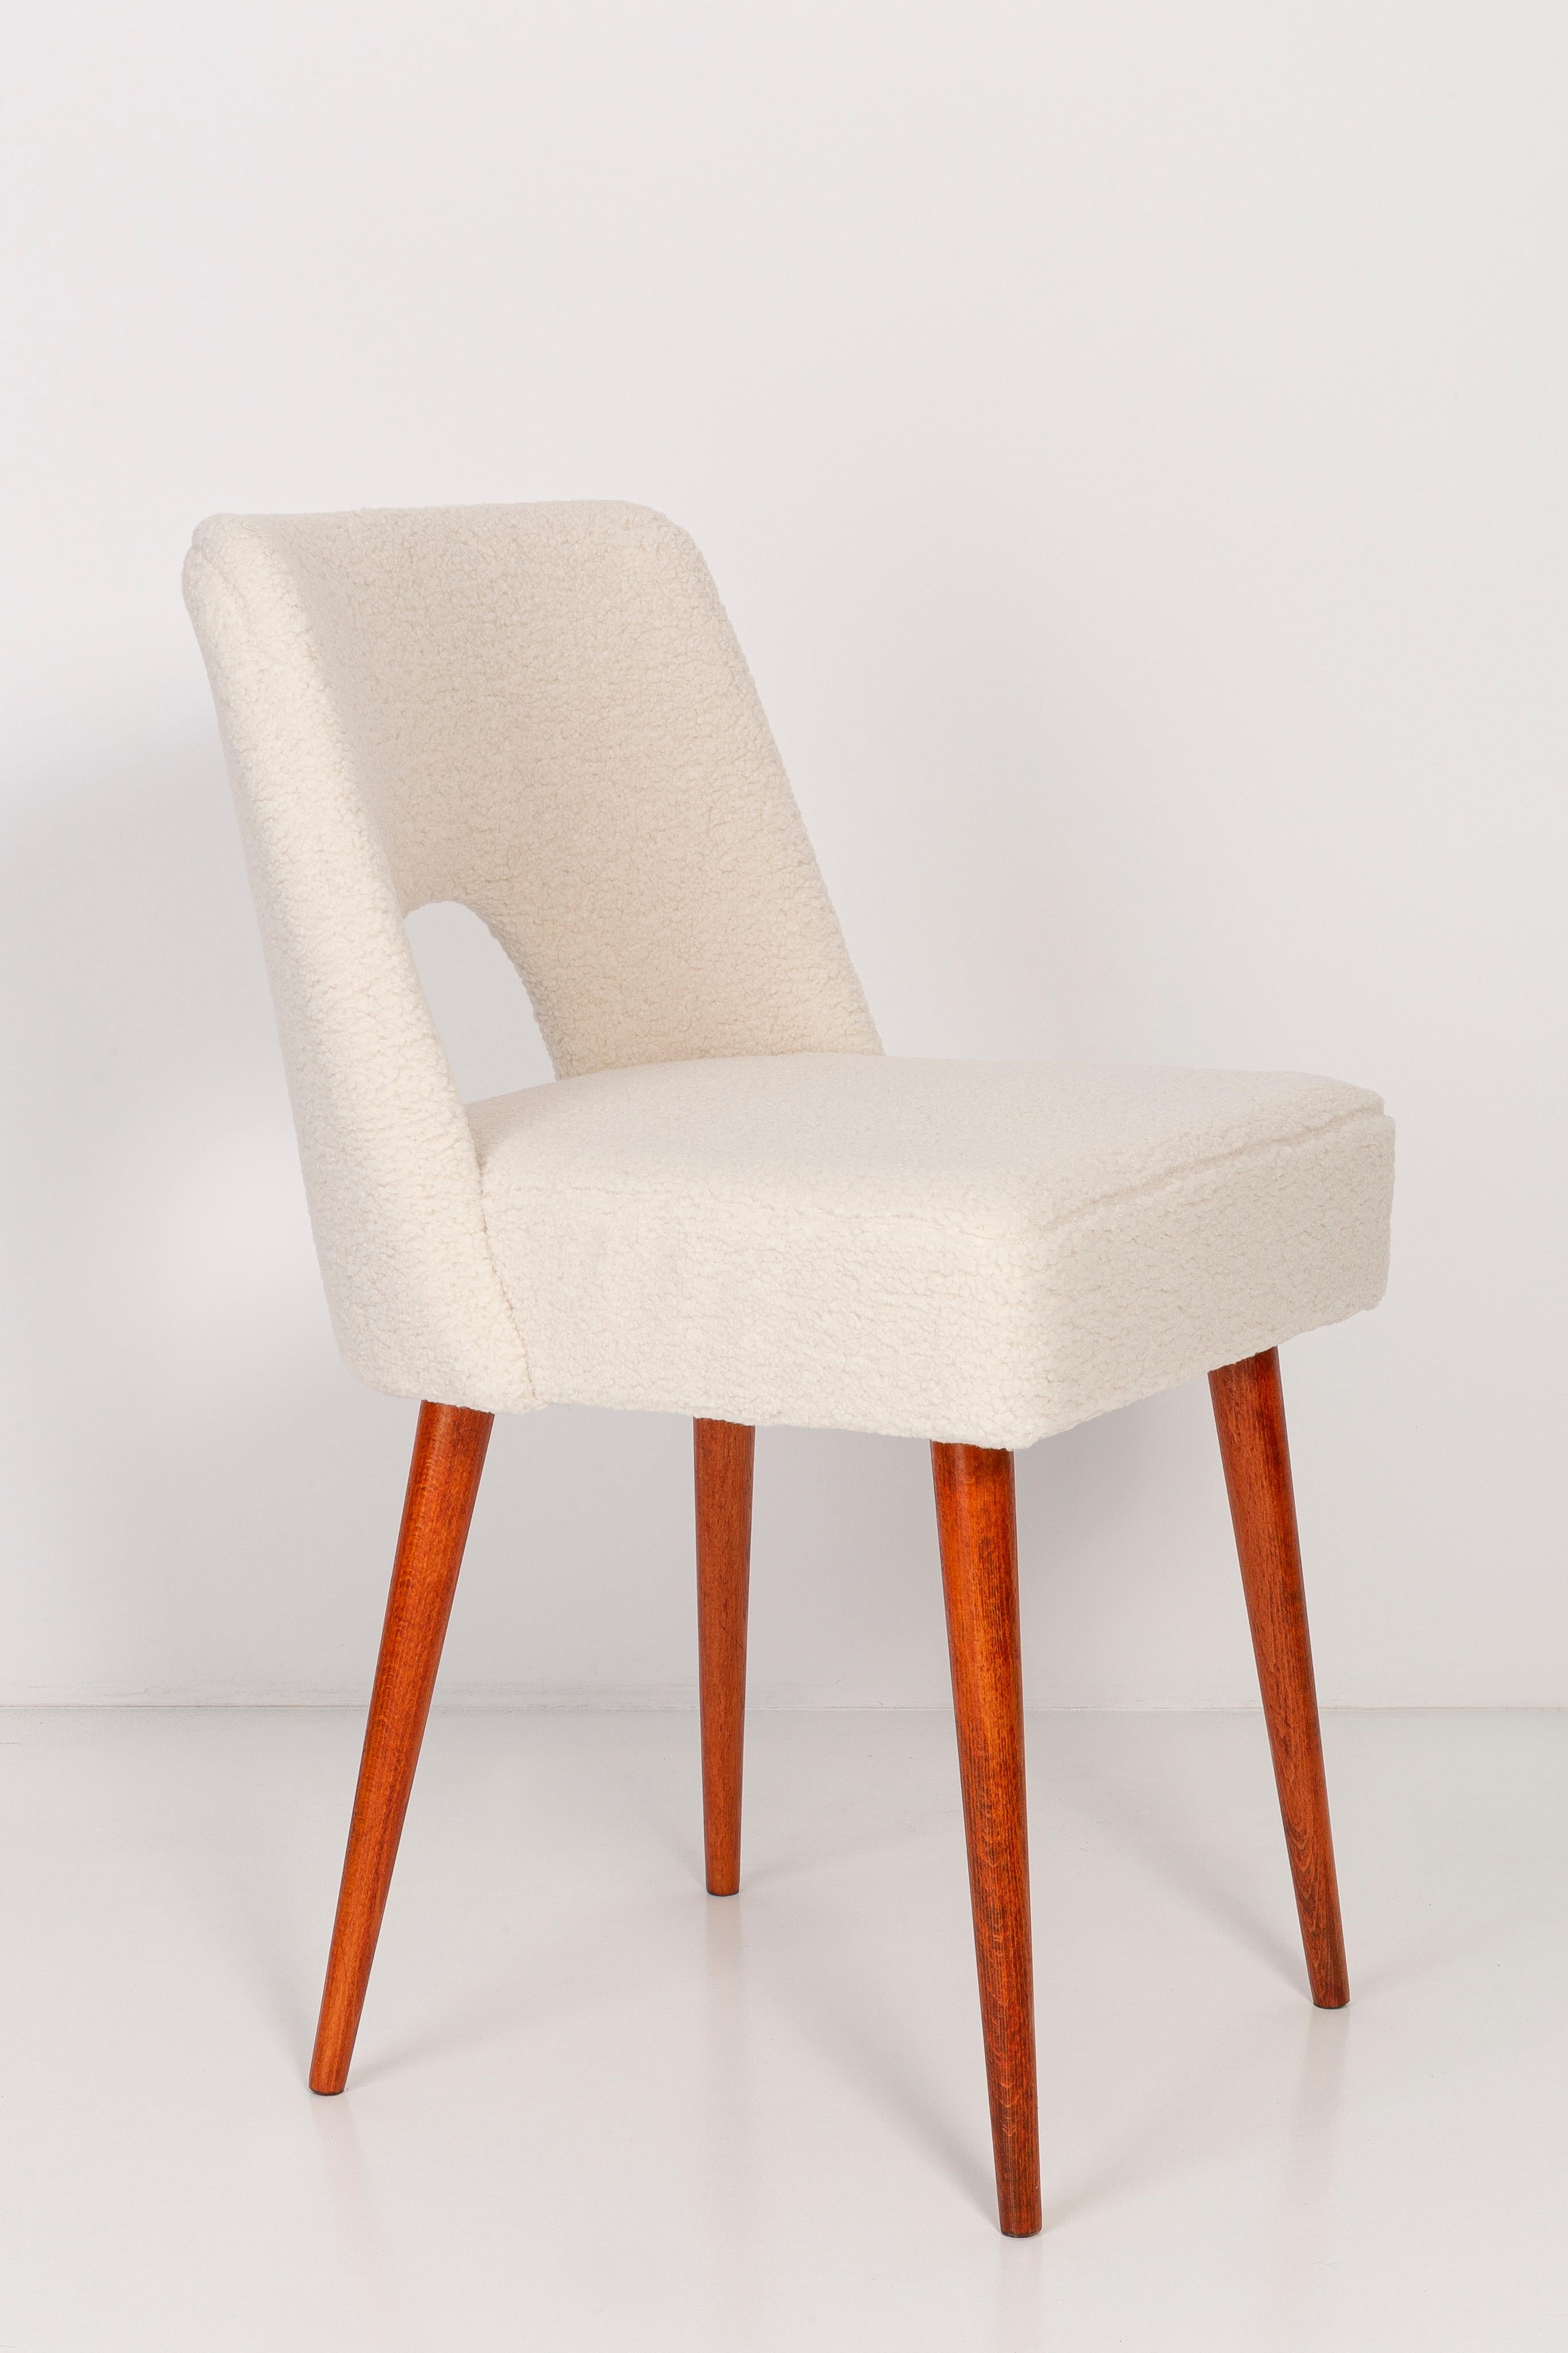 Hand-Crafted Set of Two Light Crème Boucle 'Shell' Chairs, 1960s For Sale